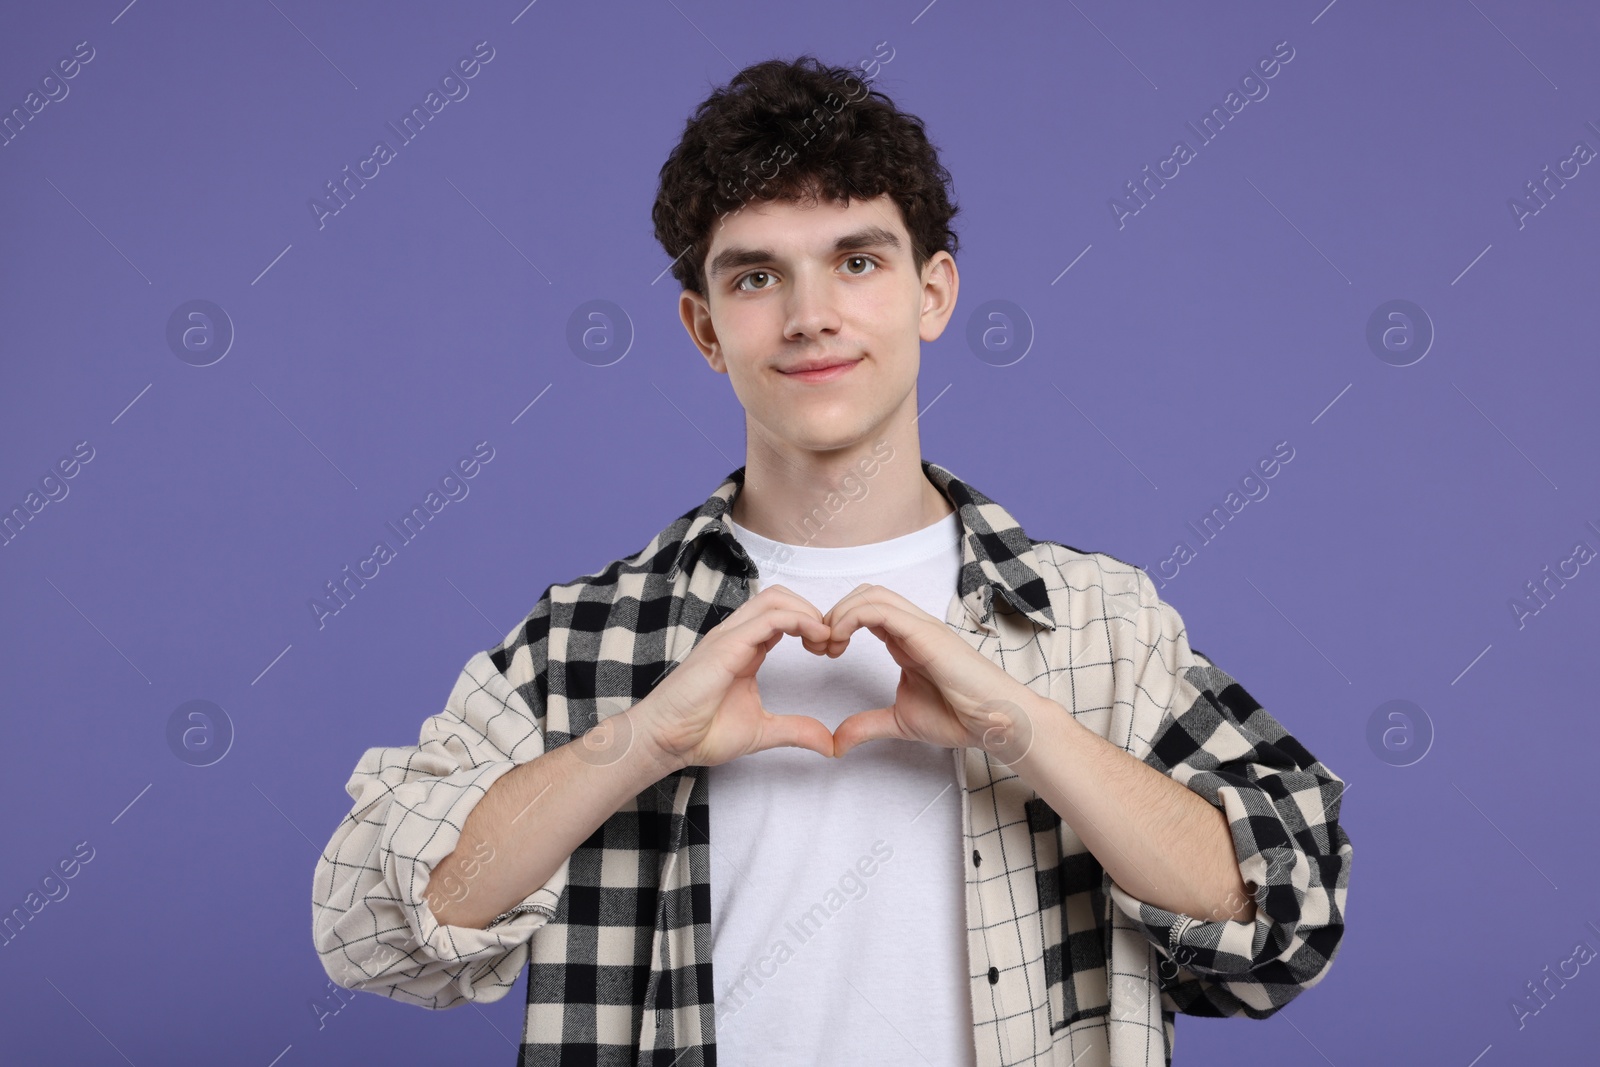 Photo of Happy young man showing heart gesture with hands on purple background